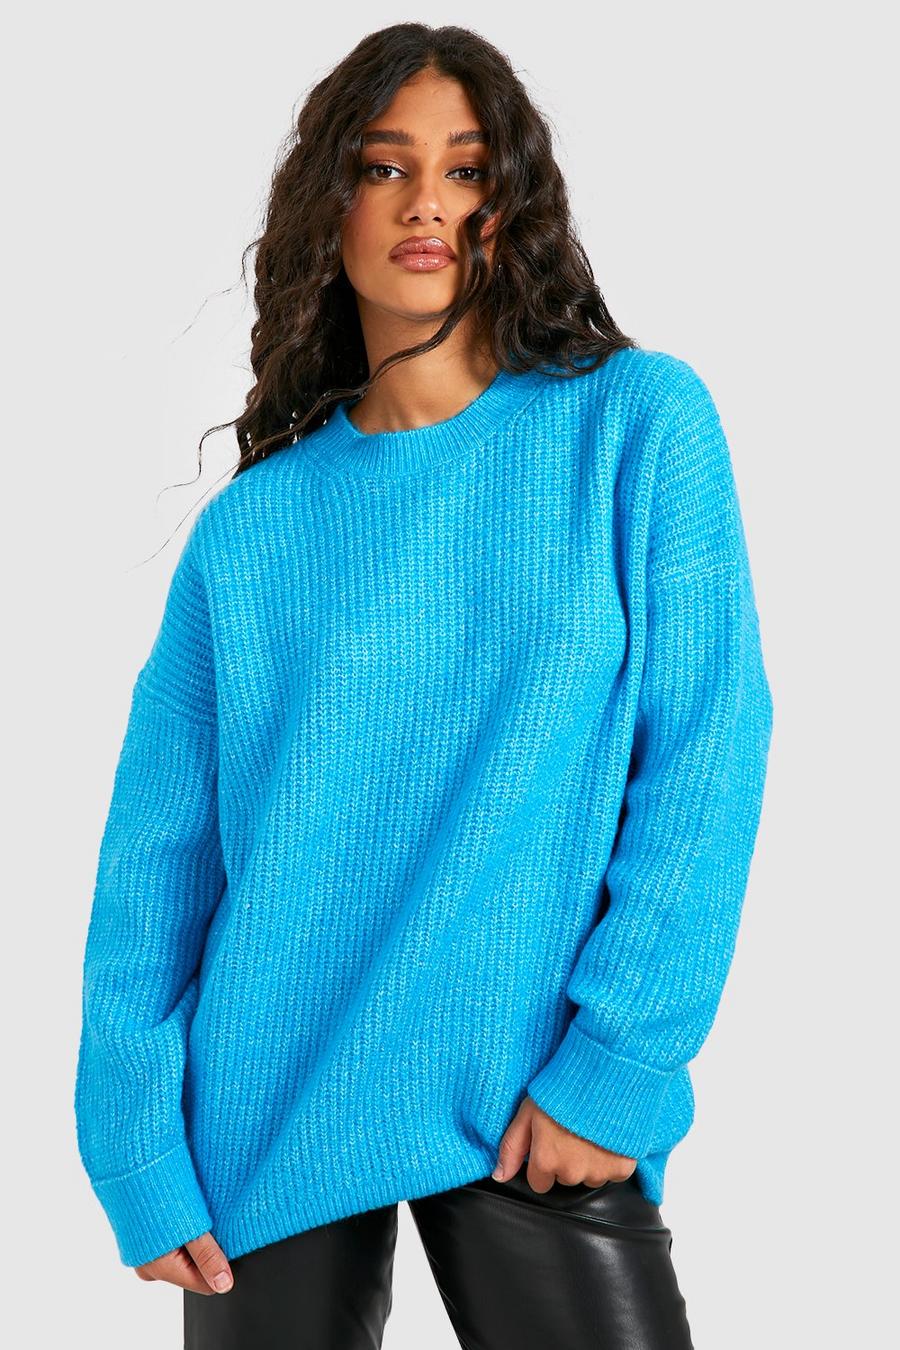 Turquoise Turn Up Cuff Soft Knit Fisherman Knitted Jumper